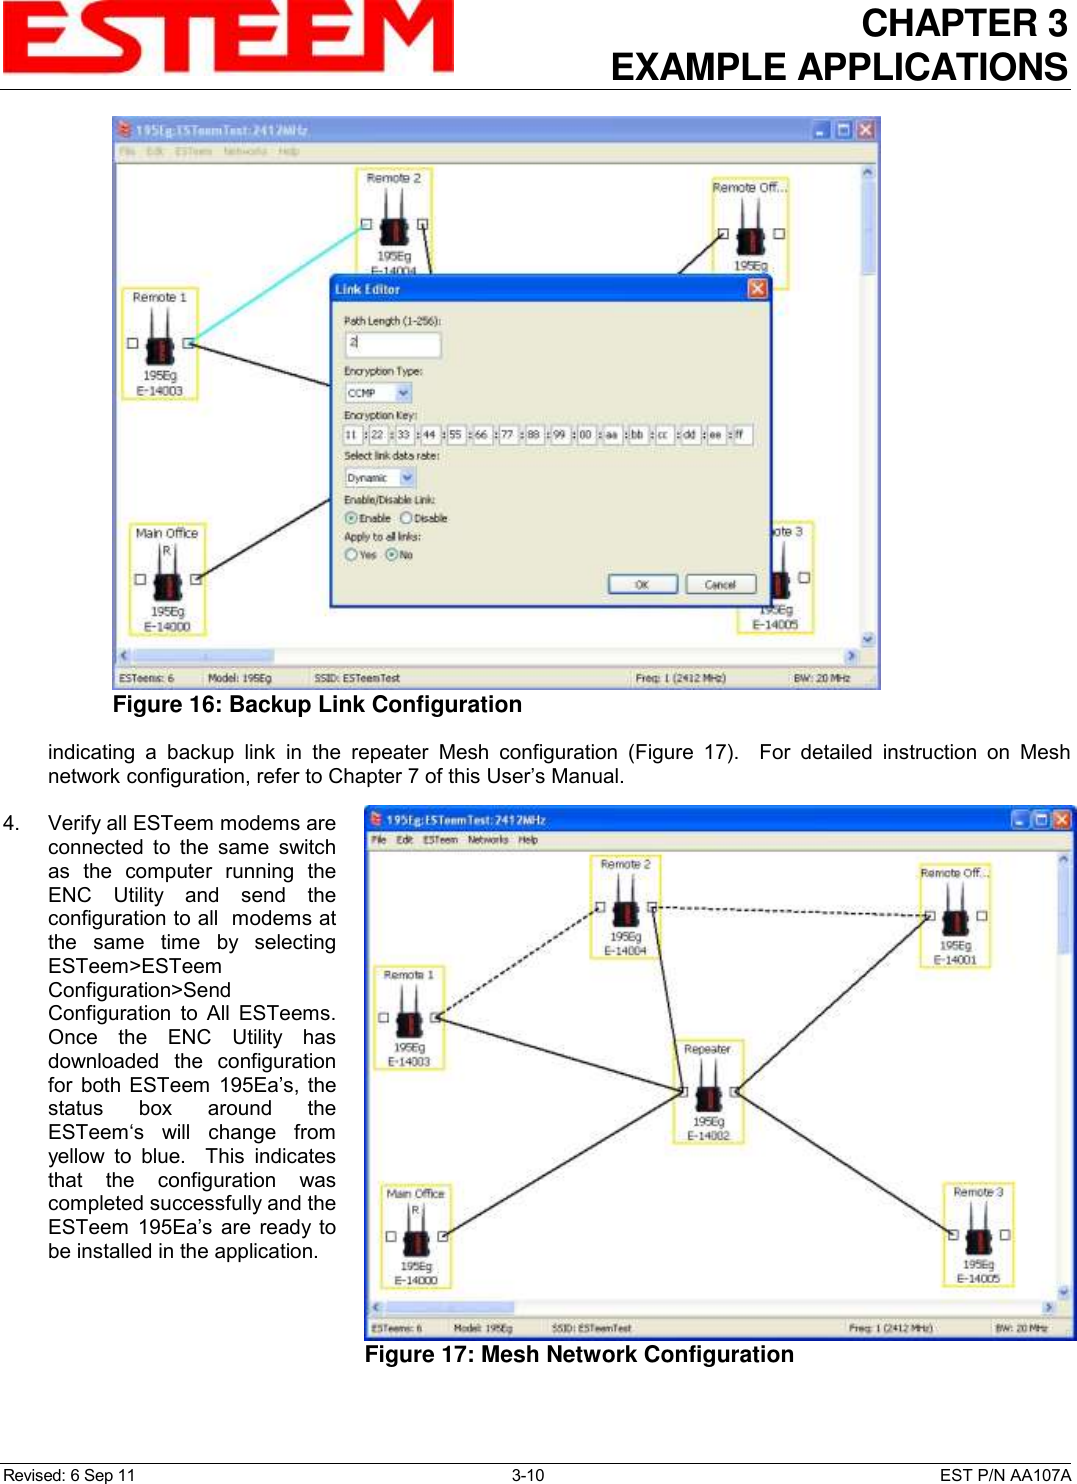 CHAPTER 3 EXAMPLE APPLICATIONS  Revised: 6 Sep 11  3-10  EST P/N AA107A indicating  a  backup  link  in  the  repeater  Mesh  configuration  (Figure  17).    For  detailed  instruction  on  Mesh network configuration, refer to Chapter 7 of this User’s Manual.  4.    Verify all ESTeem modems are connected  to  the  same  switch as  the  computer  running  the ENC  Utility  and  send  the configuration to all  modems at the  same  time  by  selecting ESTeem&gt;ESTeem Configuration&gt;Send Configuration  to  All  ESTeems. Once  the  ENC  Utility  has downloaded  the  configuration for  both  ESTeem  195Ea’s, the status  box  around  the ESTeem‘s  will  change  from yellow  to  blue.    This  indicates that  the  configuration  was completed successfully and the ESTeem  195Ea’s  are  ready  to be installed in the application.  Figure 17: Mesh Network Configuration   Figure 16: Backup Link Configuration  